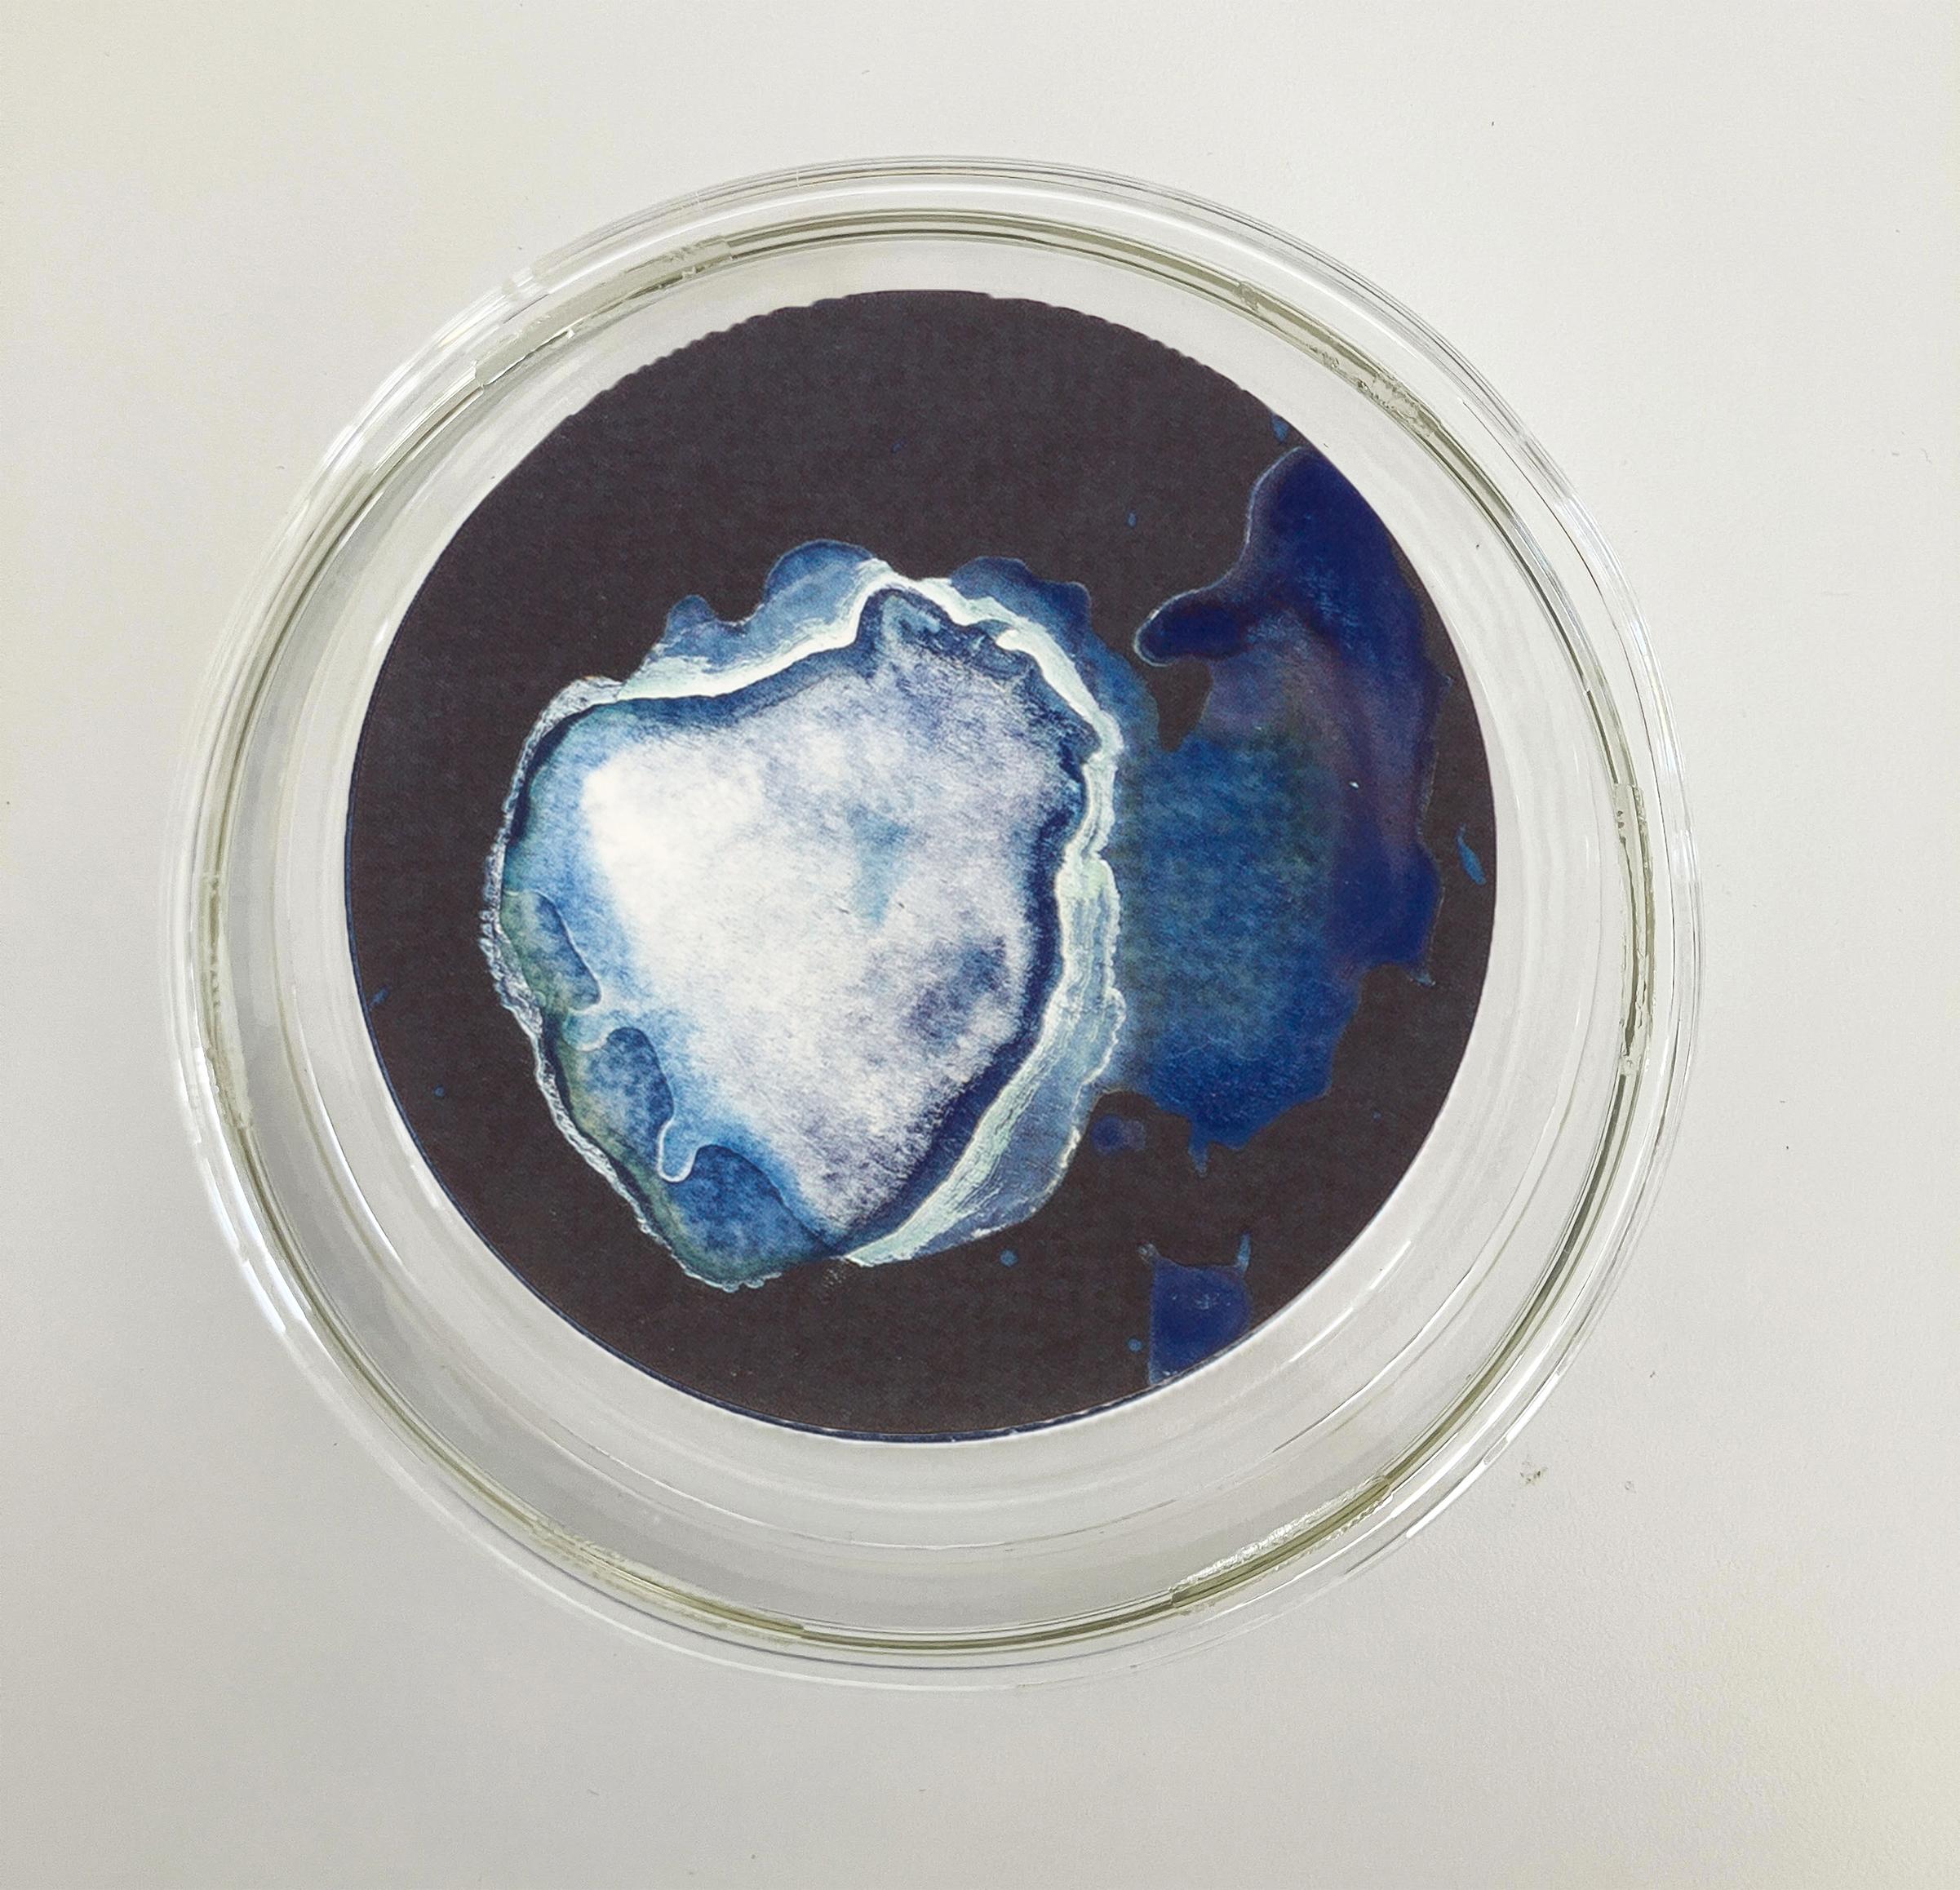 Medusas 11, 12 y 13. Cyanotype photograhs mounted in high resistance glass dish - Blue Still-Life Sculpture by Paola Davila